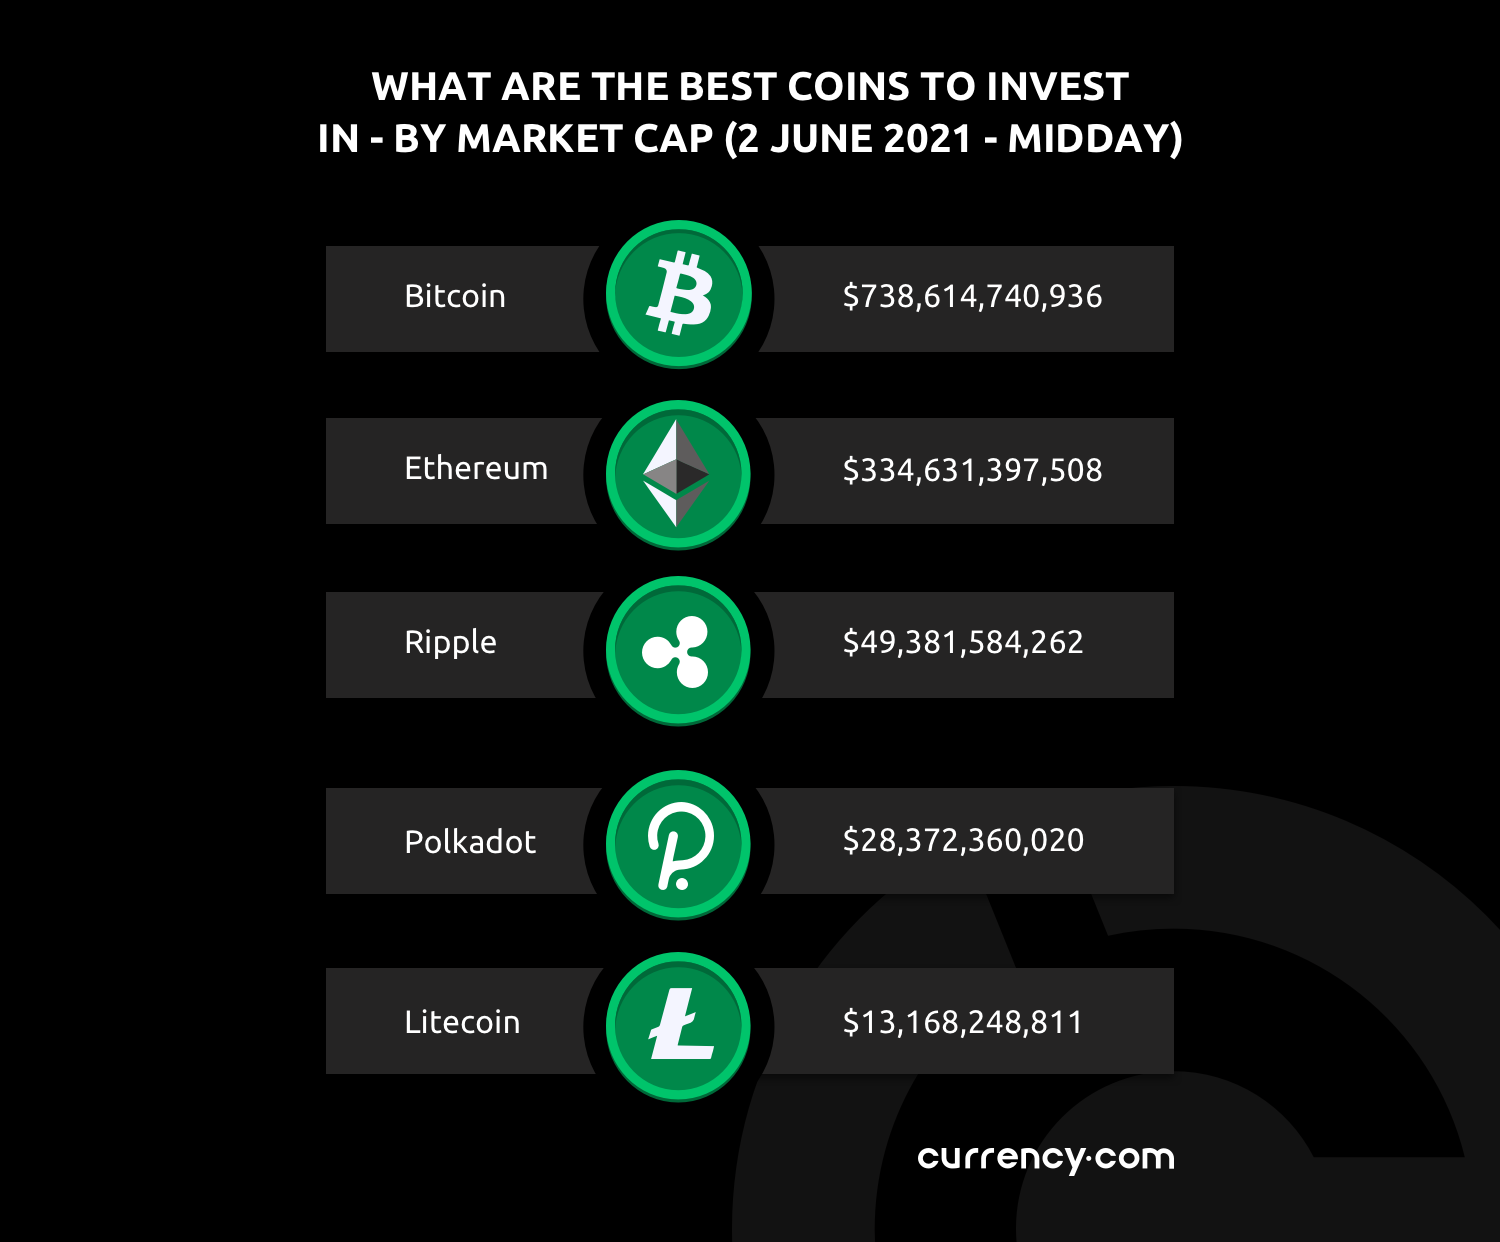 Bitcoin: would we invest your money in it? - Wealth management - Schroders